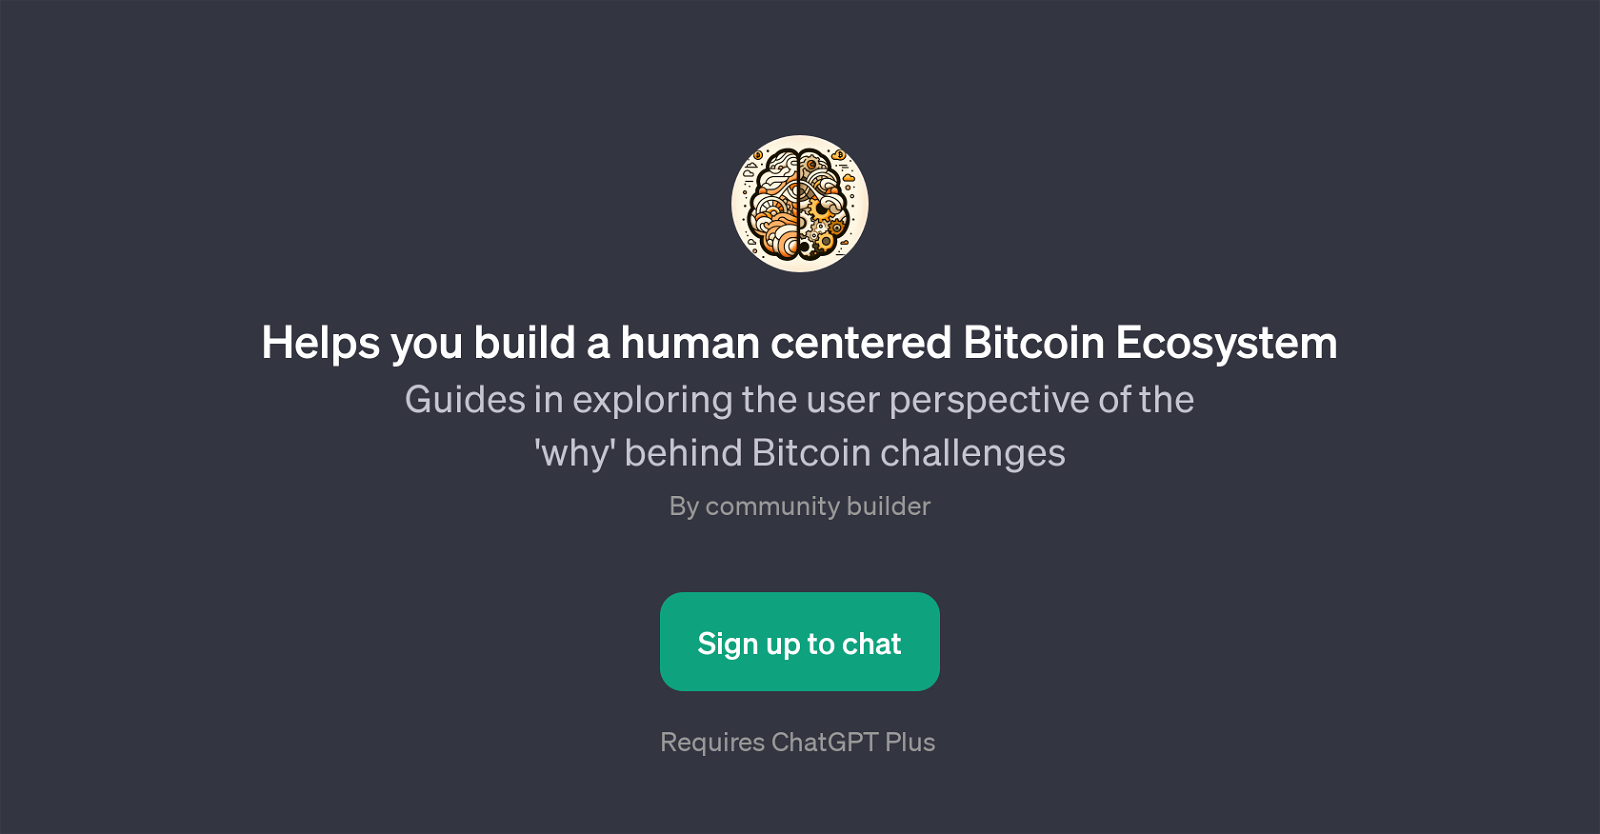 Helps You Build a Human-Centered Bitcoin Ecosystem website